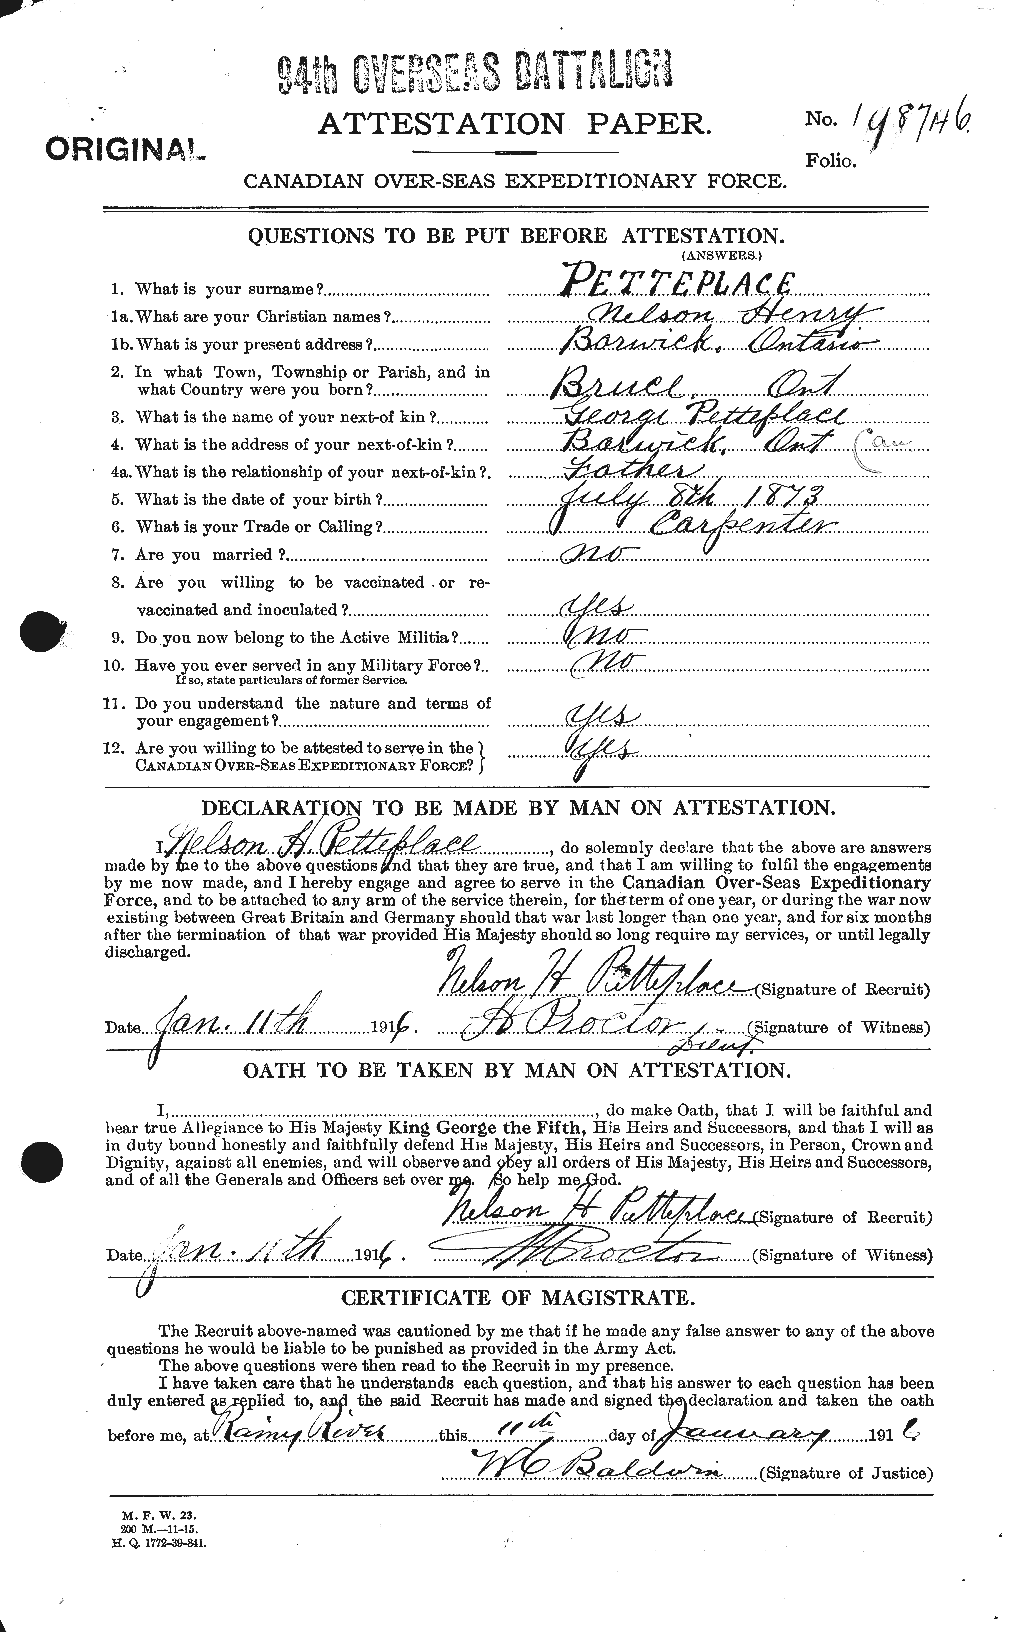 Personnel Records of the First World War - CEF 576449a